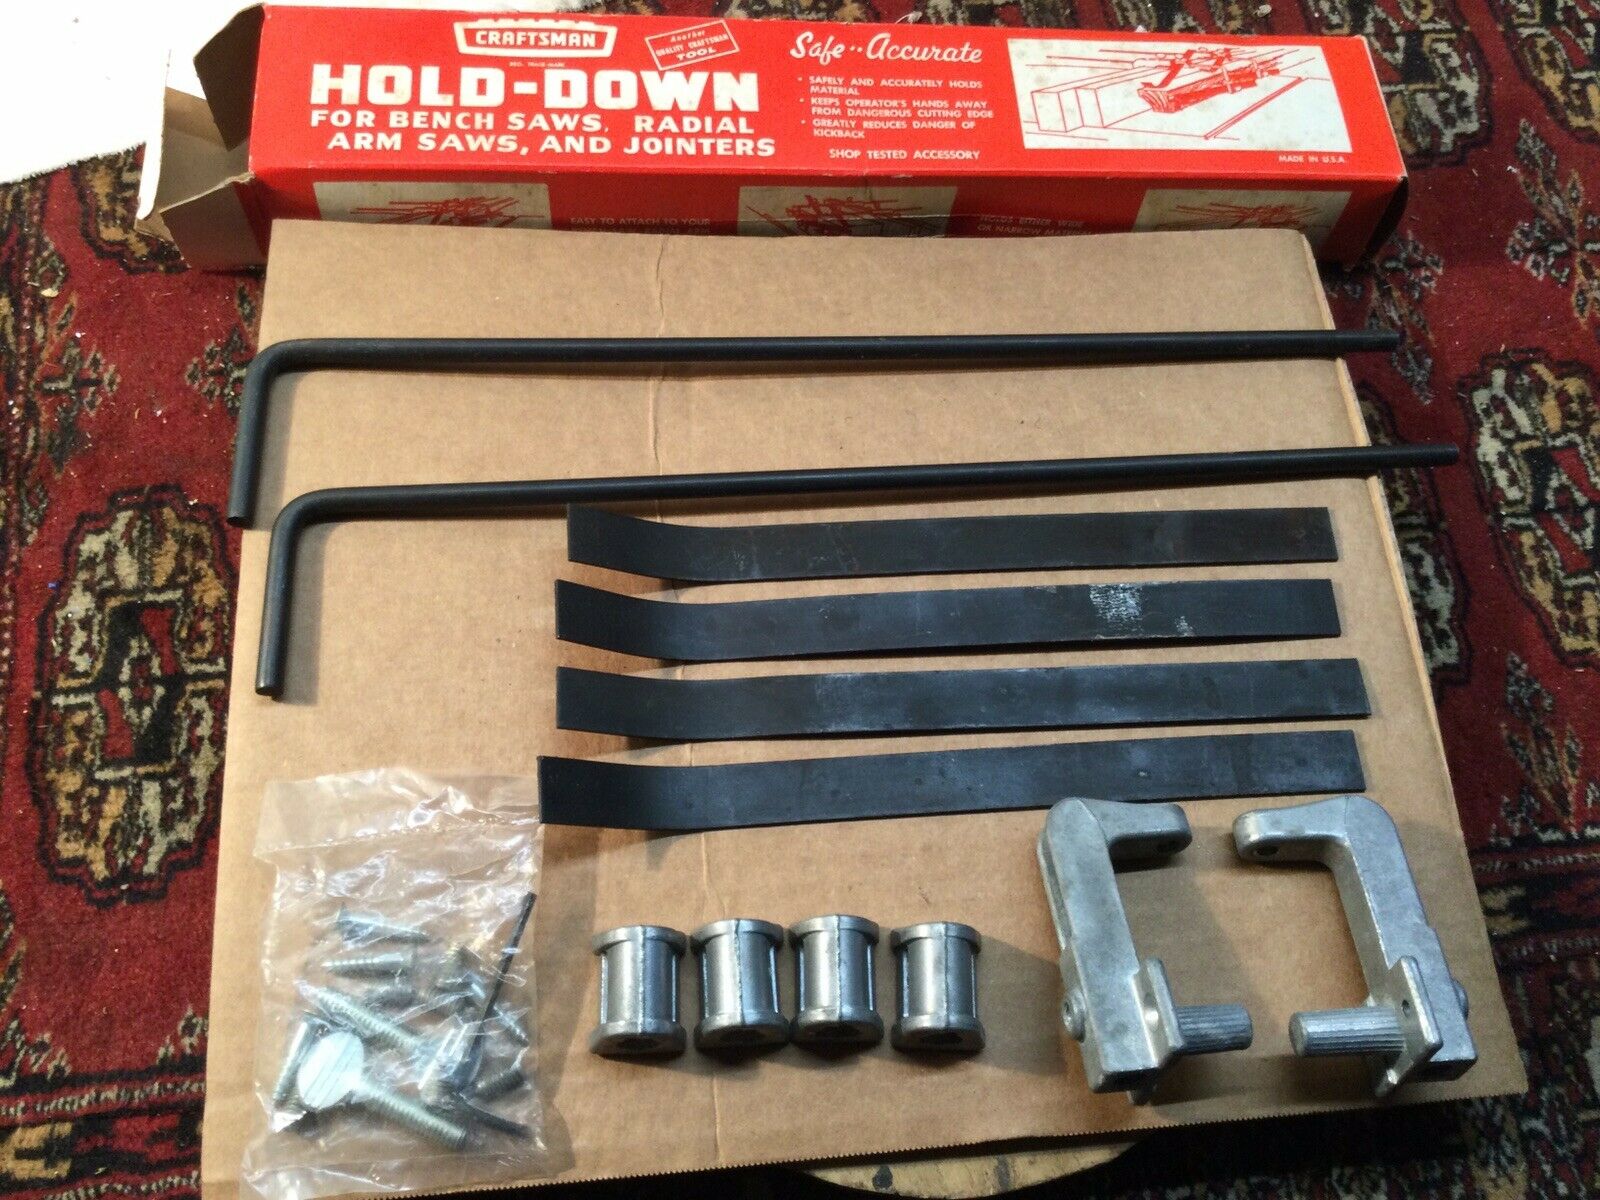 Sears Craftsman Hold-down Table Bench & Radial Arm Saws & Jointers 9-3230, Nos